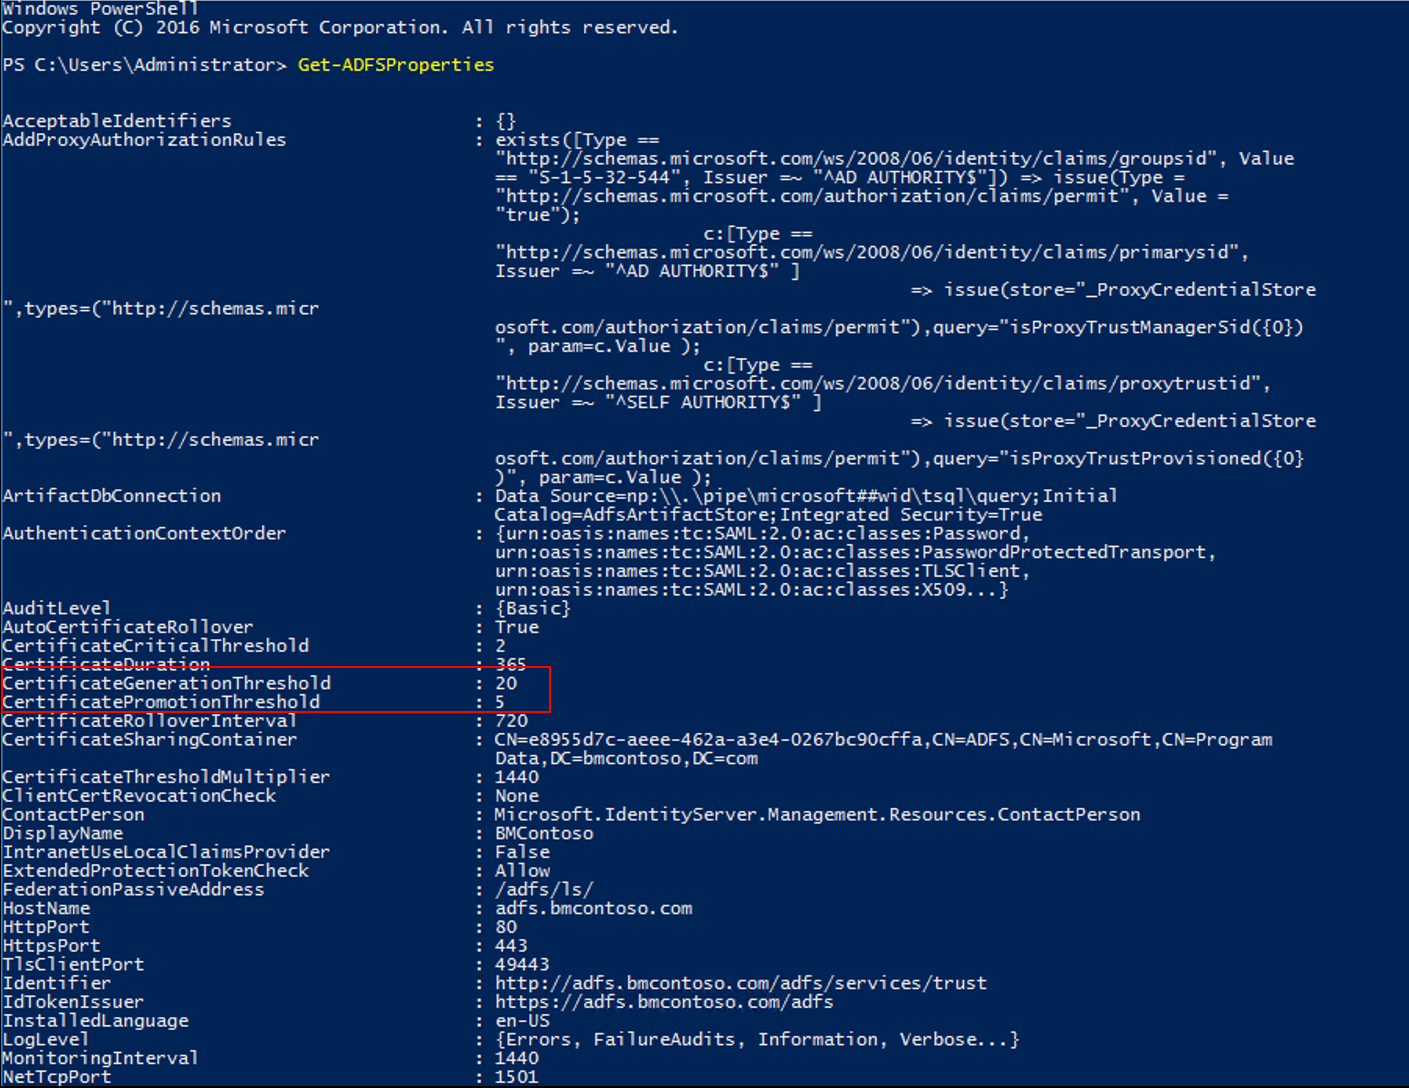 Screenshot of the PowerShell window showing the results of the Get-ADFSProperties command with the Certificate Generation Threshold and Certificate Promotion Threshold properties called out.